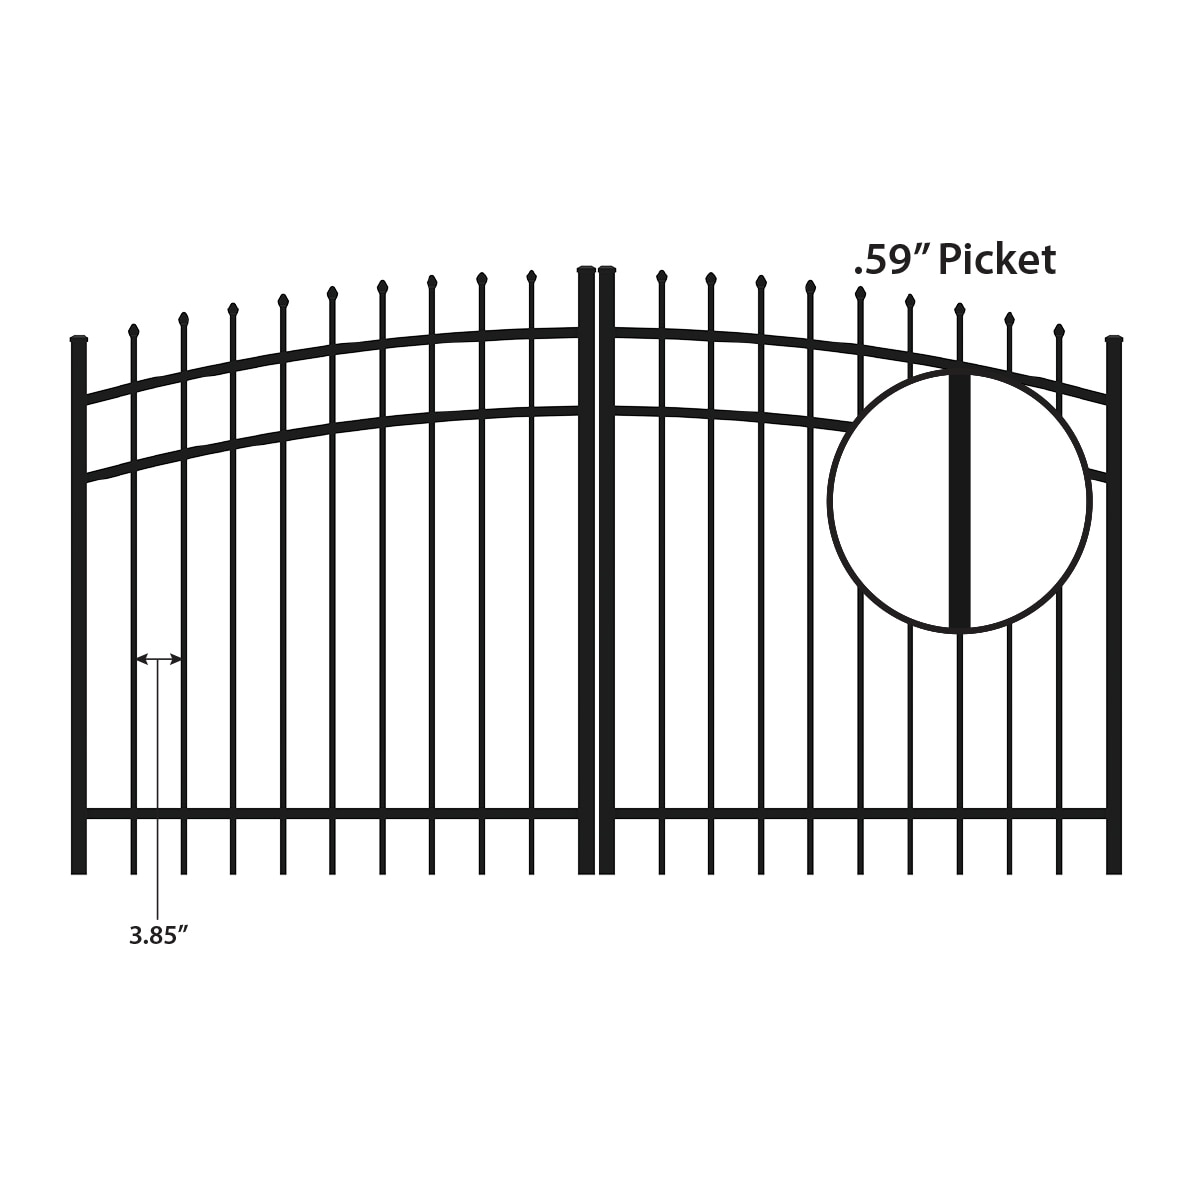 PLEASE DELIVER ALL PACKAGES OUTSIDE THE GATE Metal Aluminum composite sign 